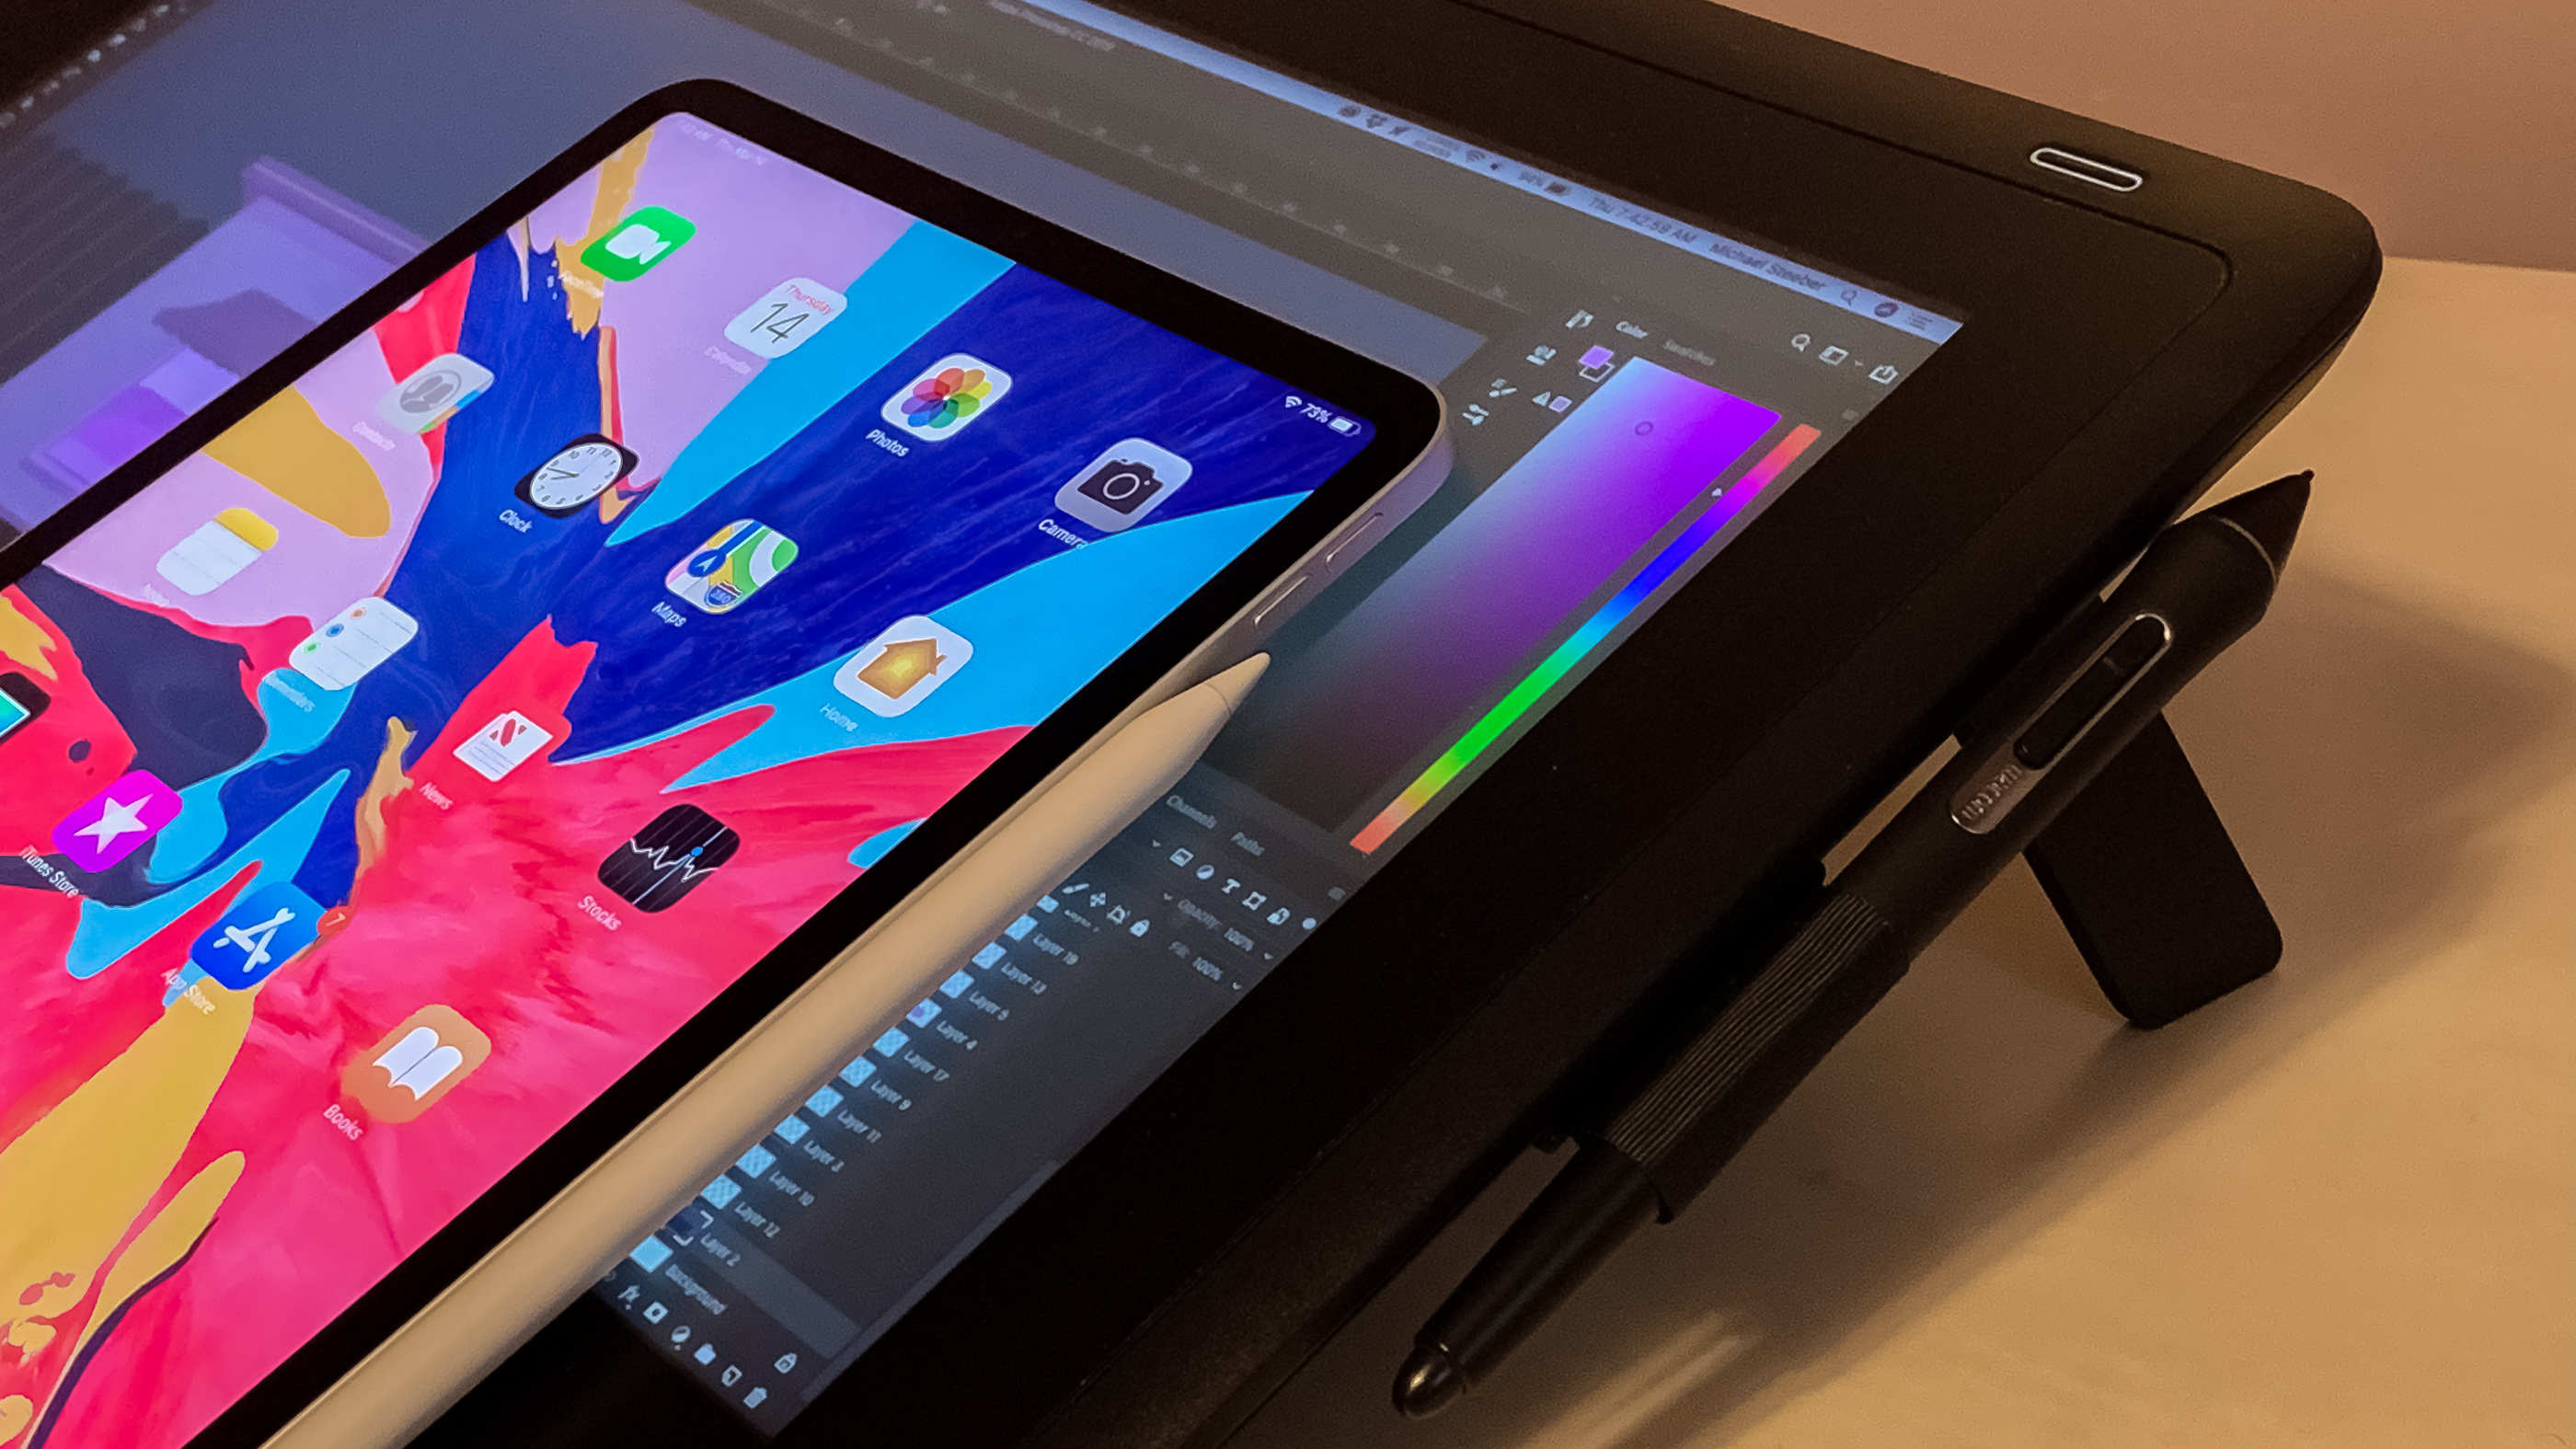 Hands-on: Wacom's Cintiq 16 tablet from the perspective of an iPad